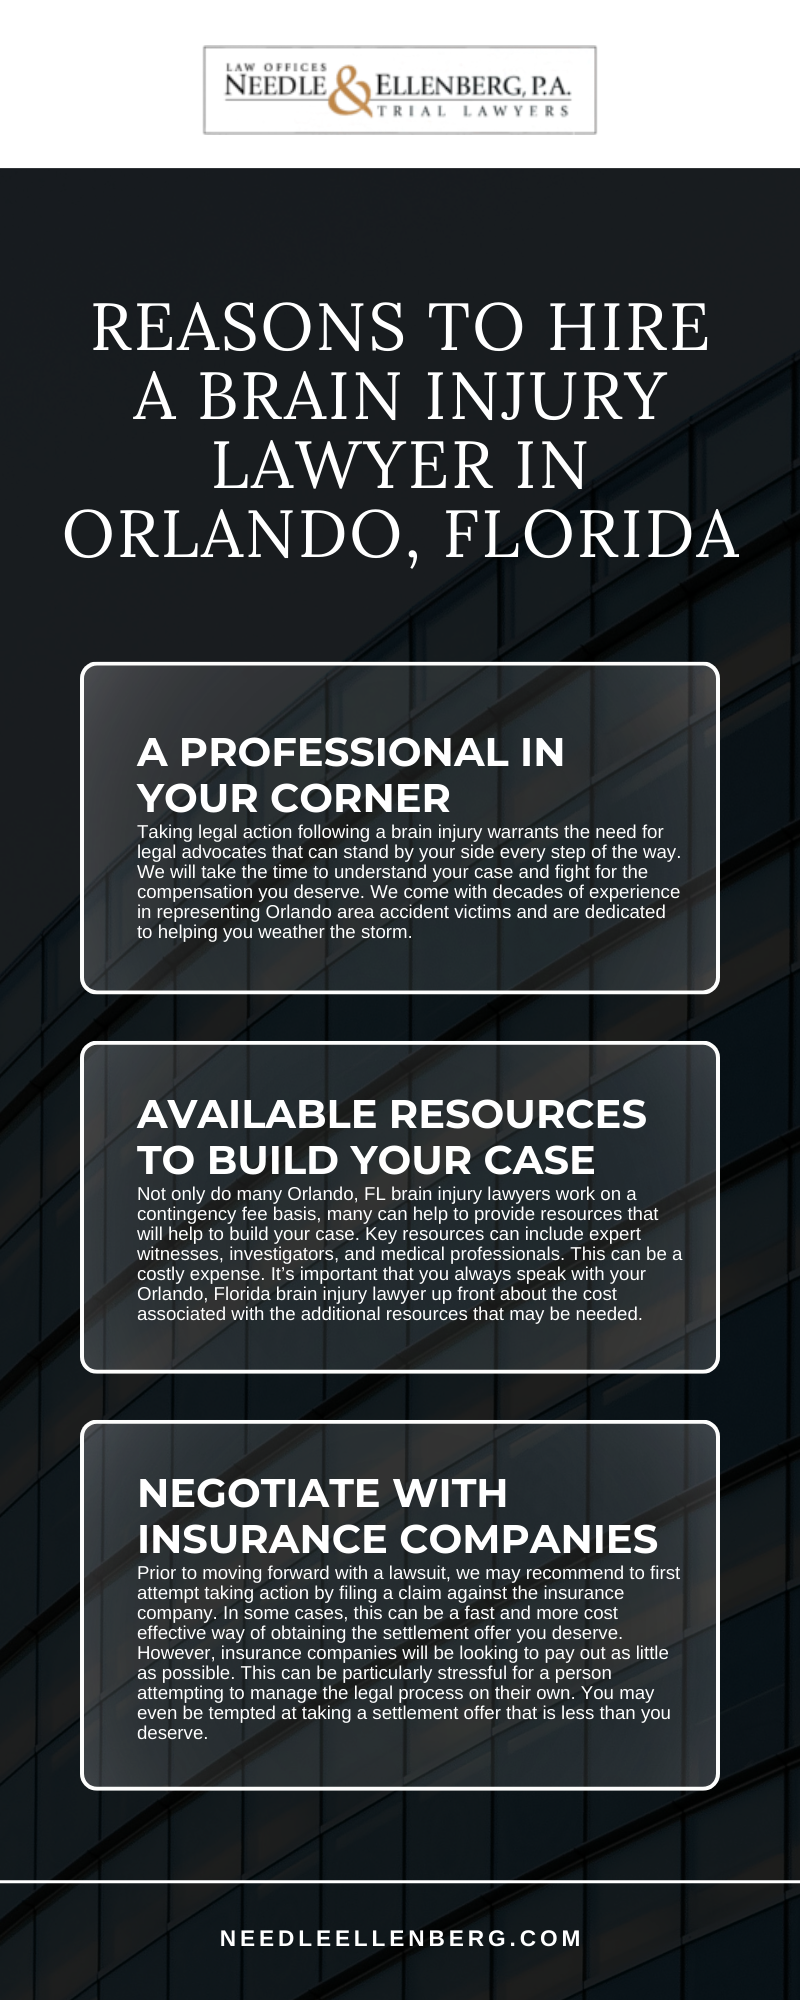 Reasons To Hire A Brain Injury Lawyer In Orlando, Florida Infographic